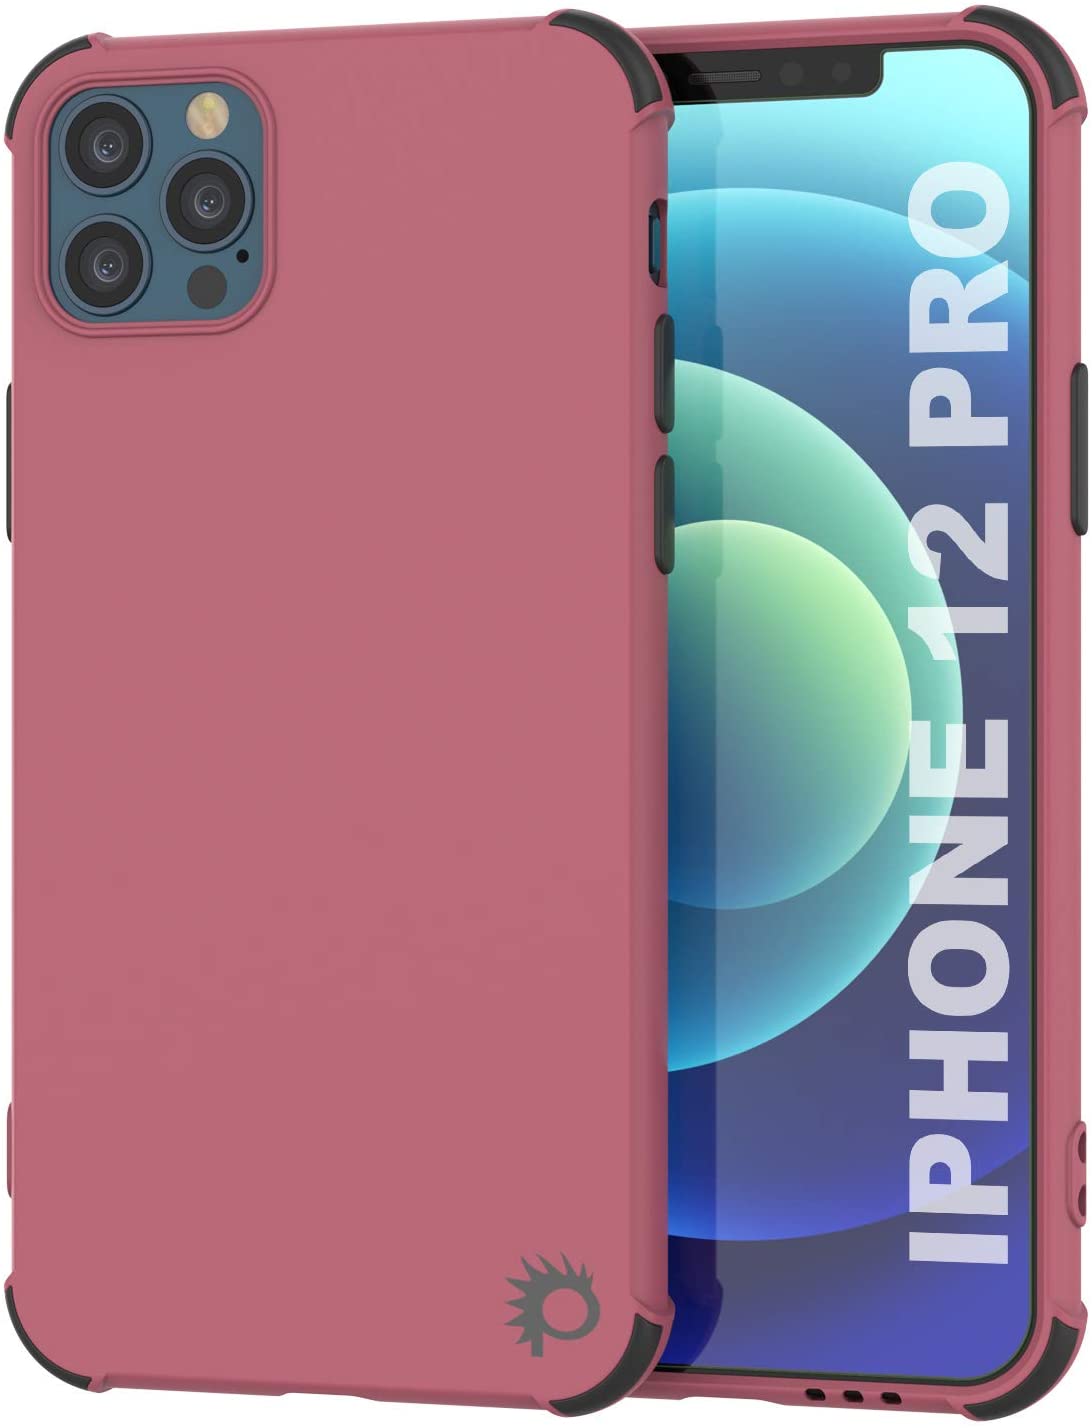 Punkcase Protective & Lightweight TPU Case [Sunshine Series] for iPhone 12 Pro [Rose] (Color in image: Rose)